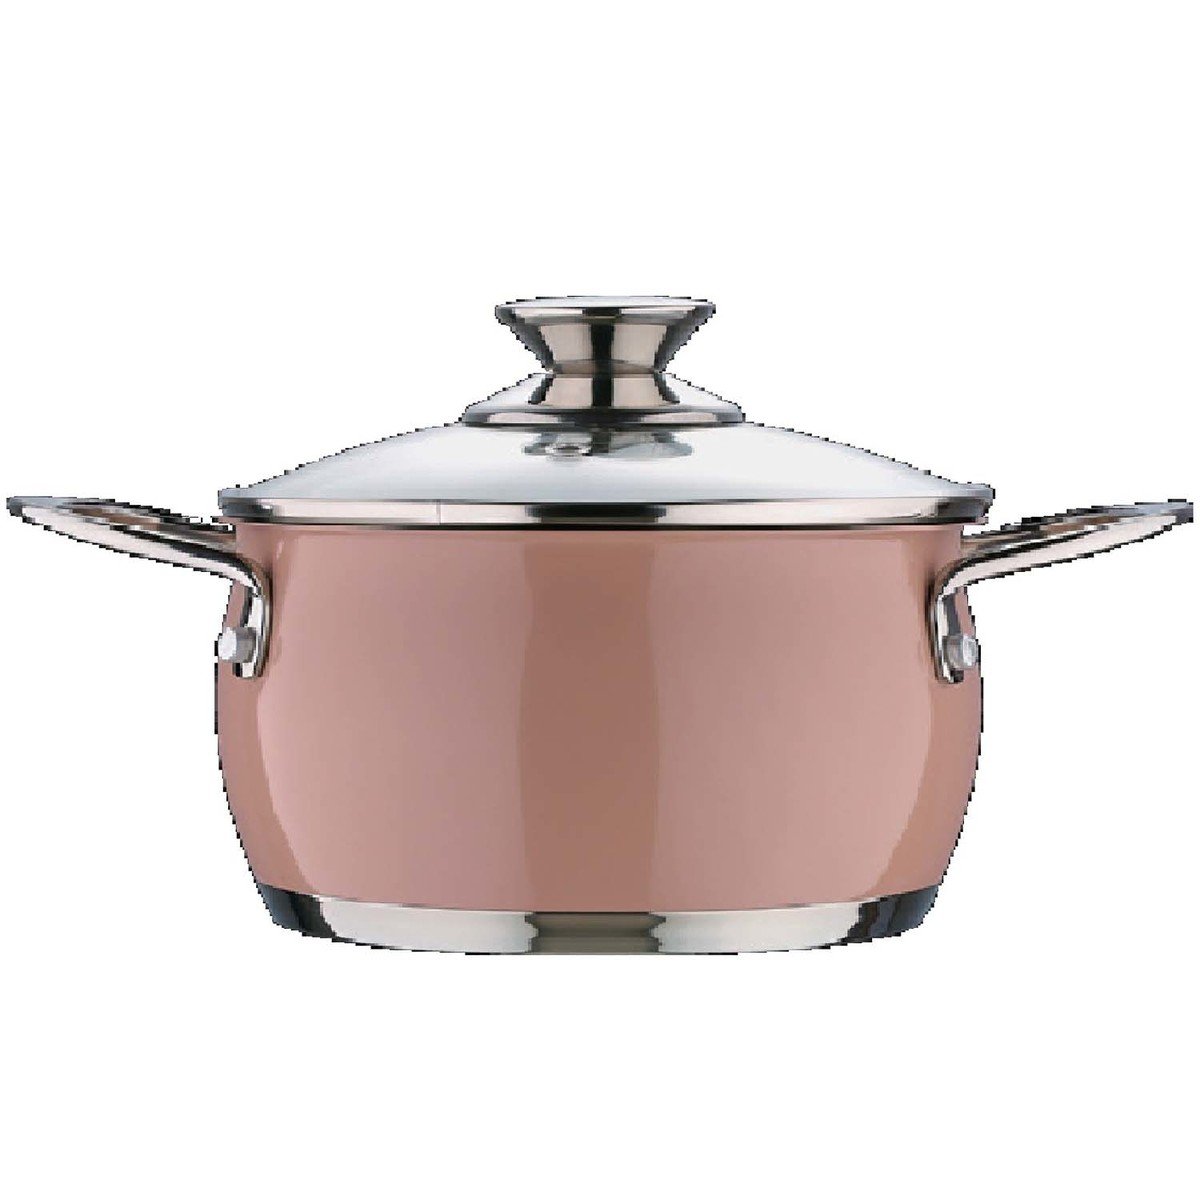 Bergner Stainless Steel Casserole 24cm Assorted Colors